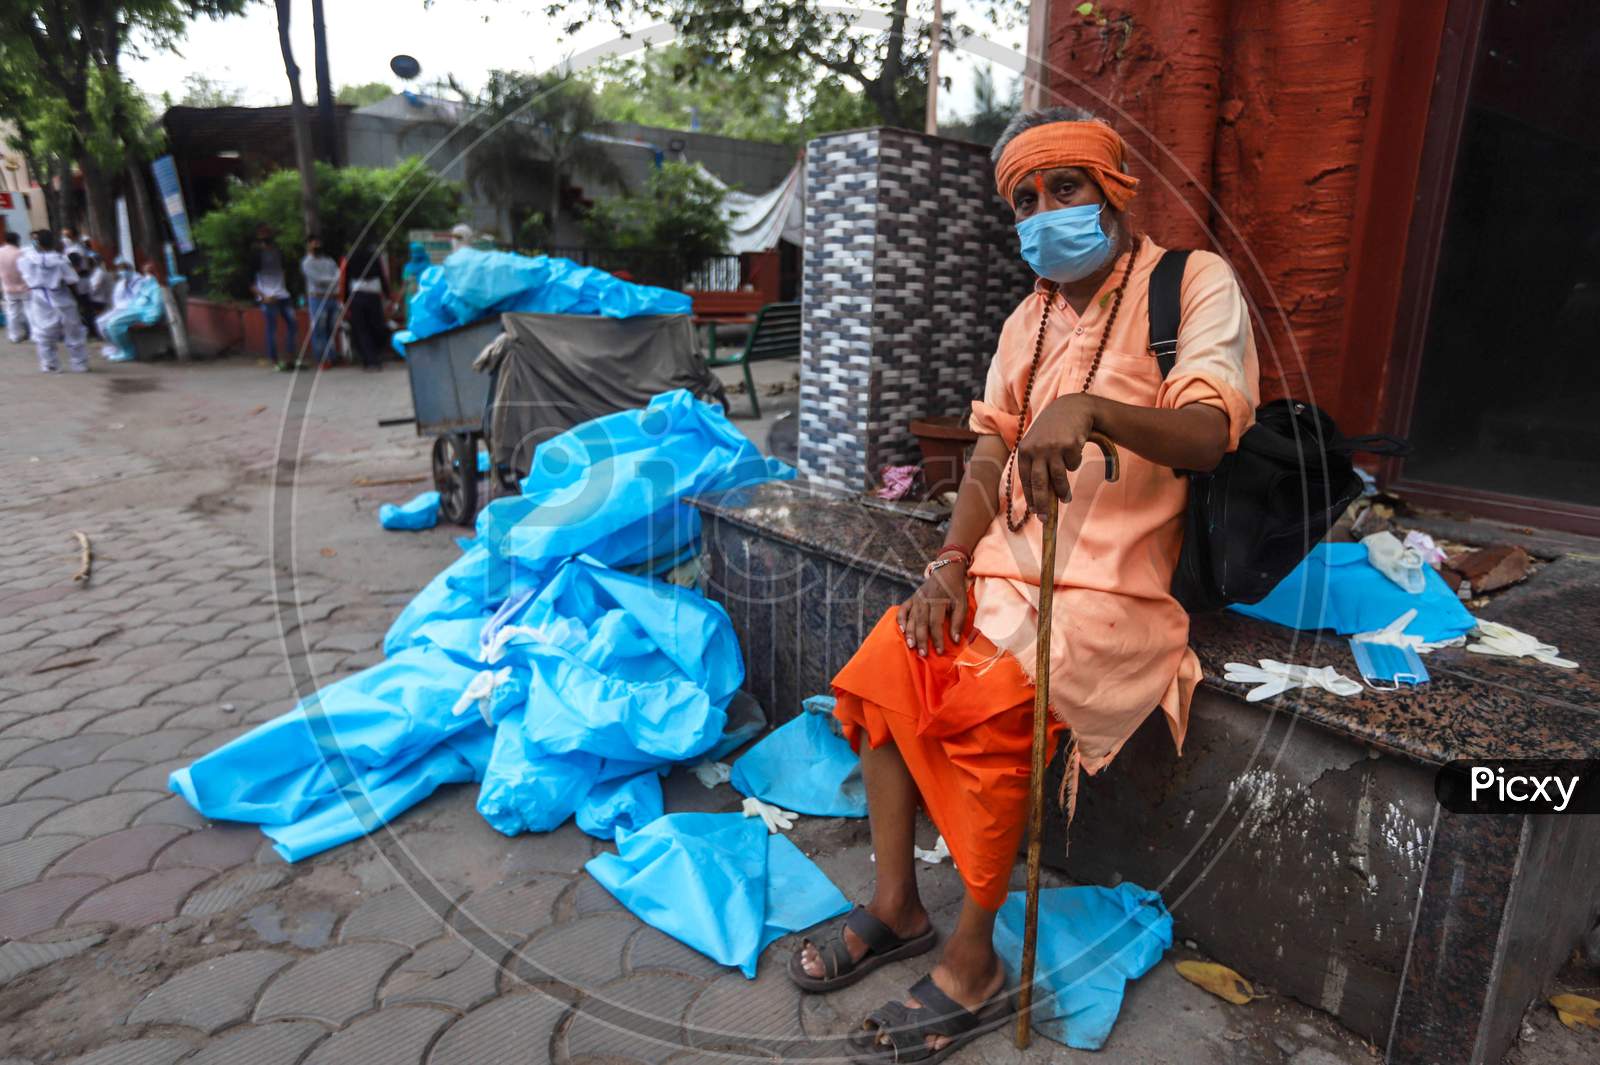 A Man Sits Next To The  Discarded Latex Gloves, Surgical Masks And Ppe Suits Lie after the cremation of a Deceased Covid-19 patient At  Nigambodh Crematorium In New Delhi, India On May 31, 2020.